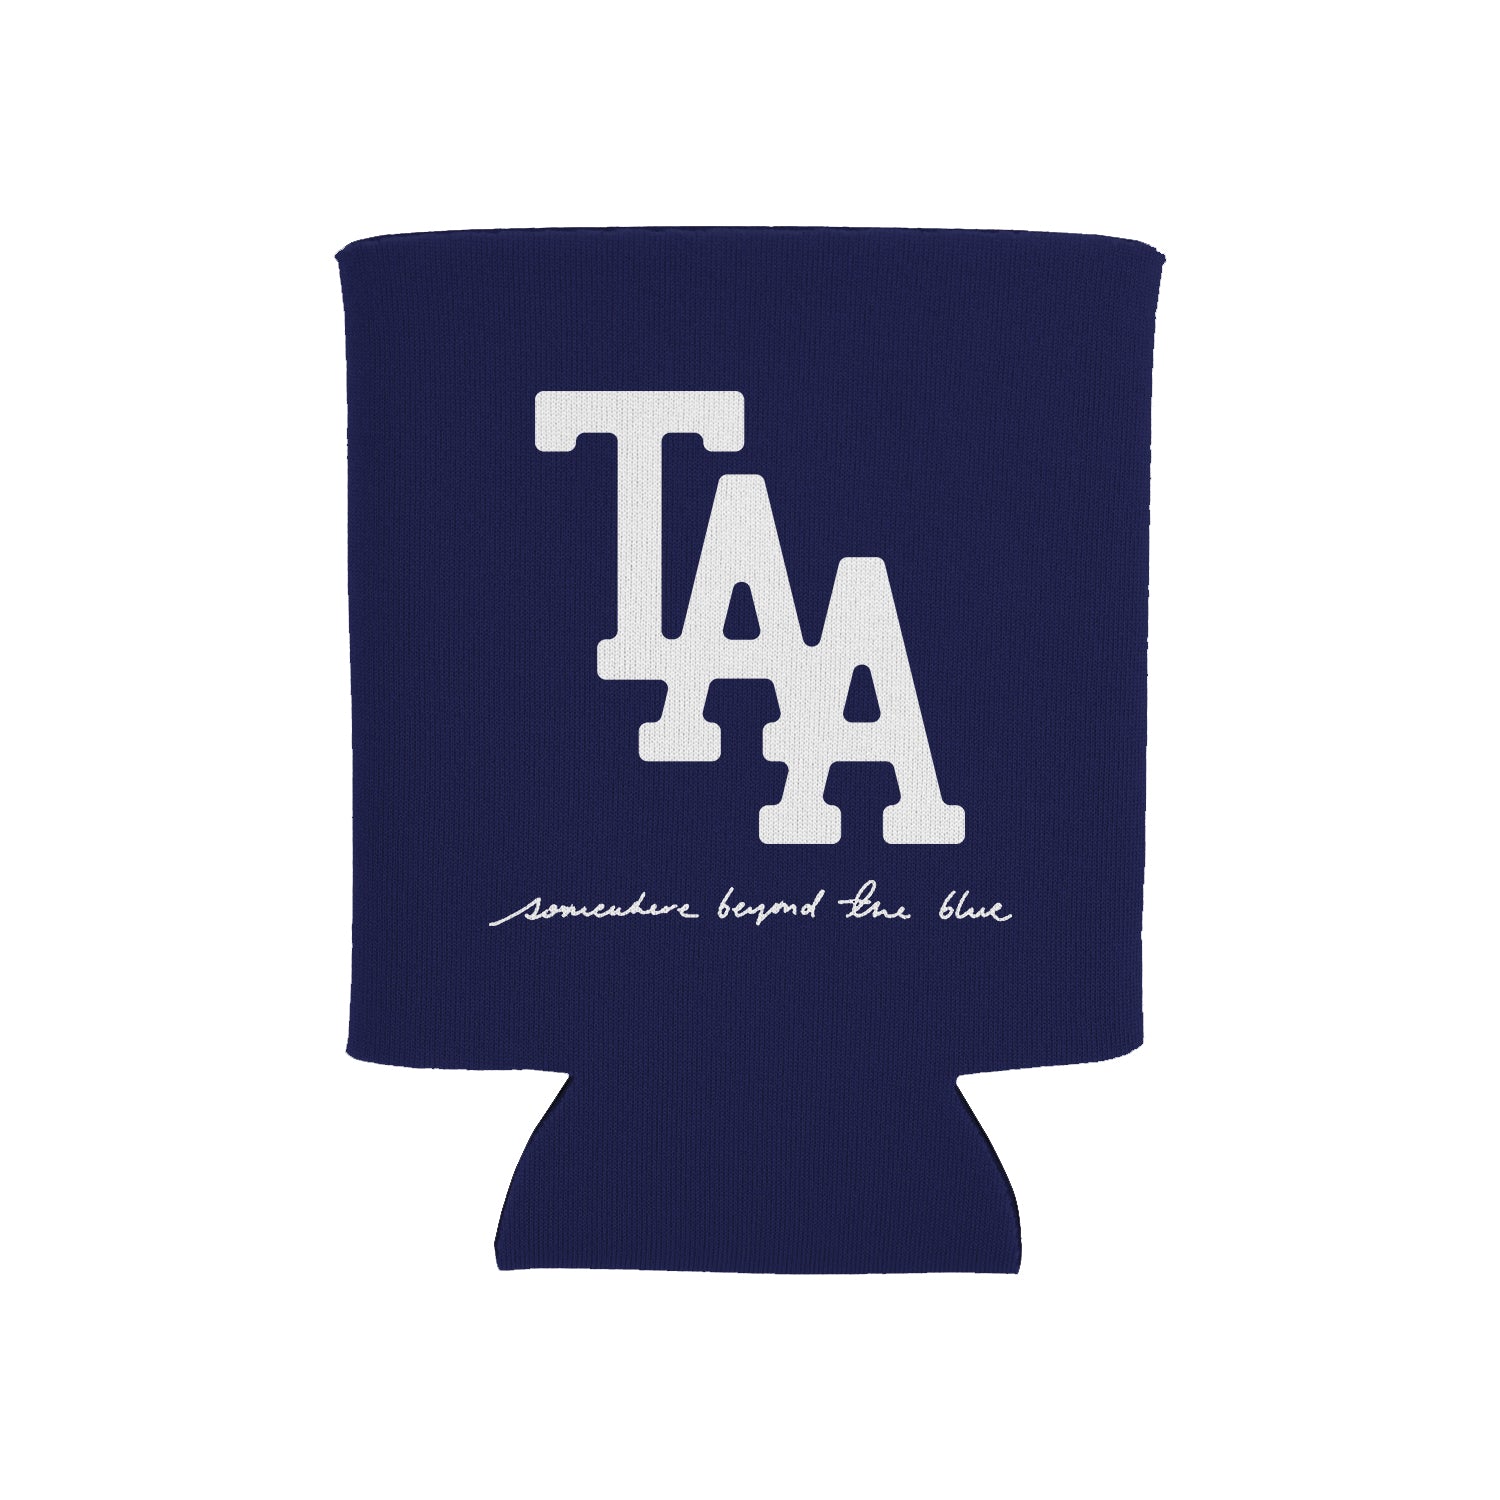 image of a navy blue drink koozie for a can. the koozie has a center print in white that has the letters T A A and below that in cursive says somewhere beyond the blue